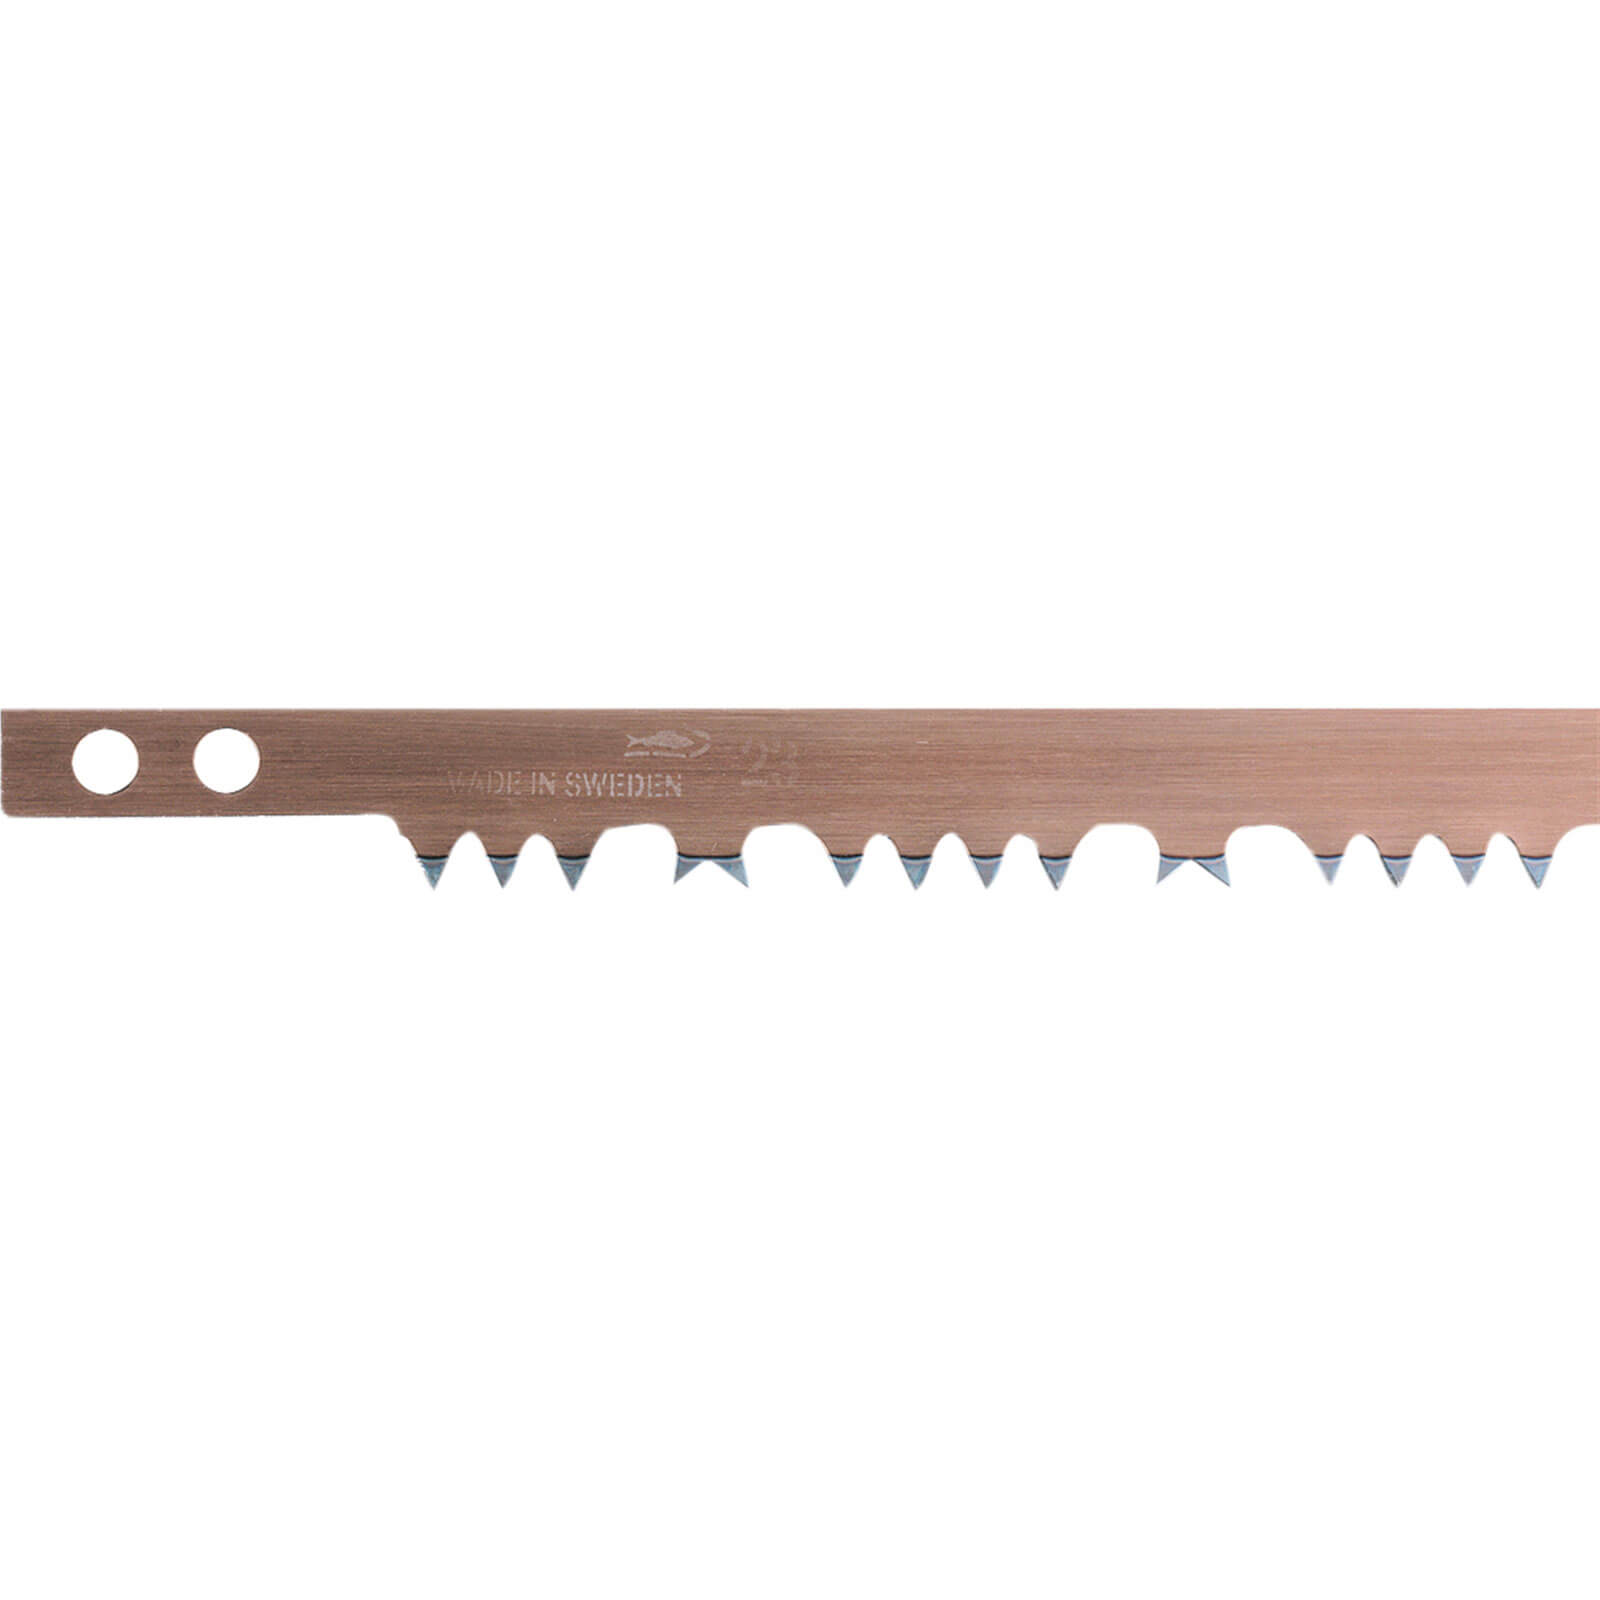 Bahco Raker Tooth Hard Point Bowsaw Blade 15" / 380mm For Green Wood